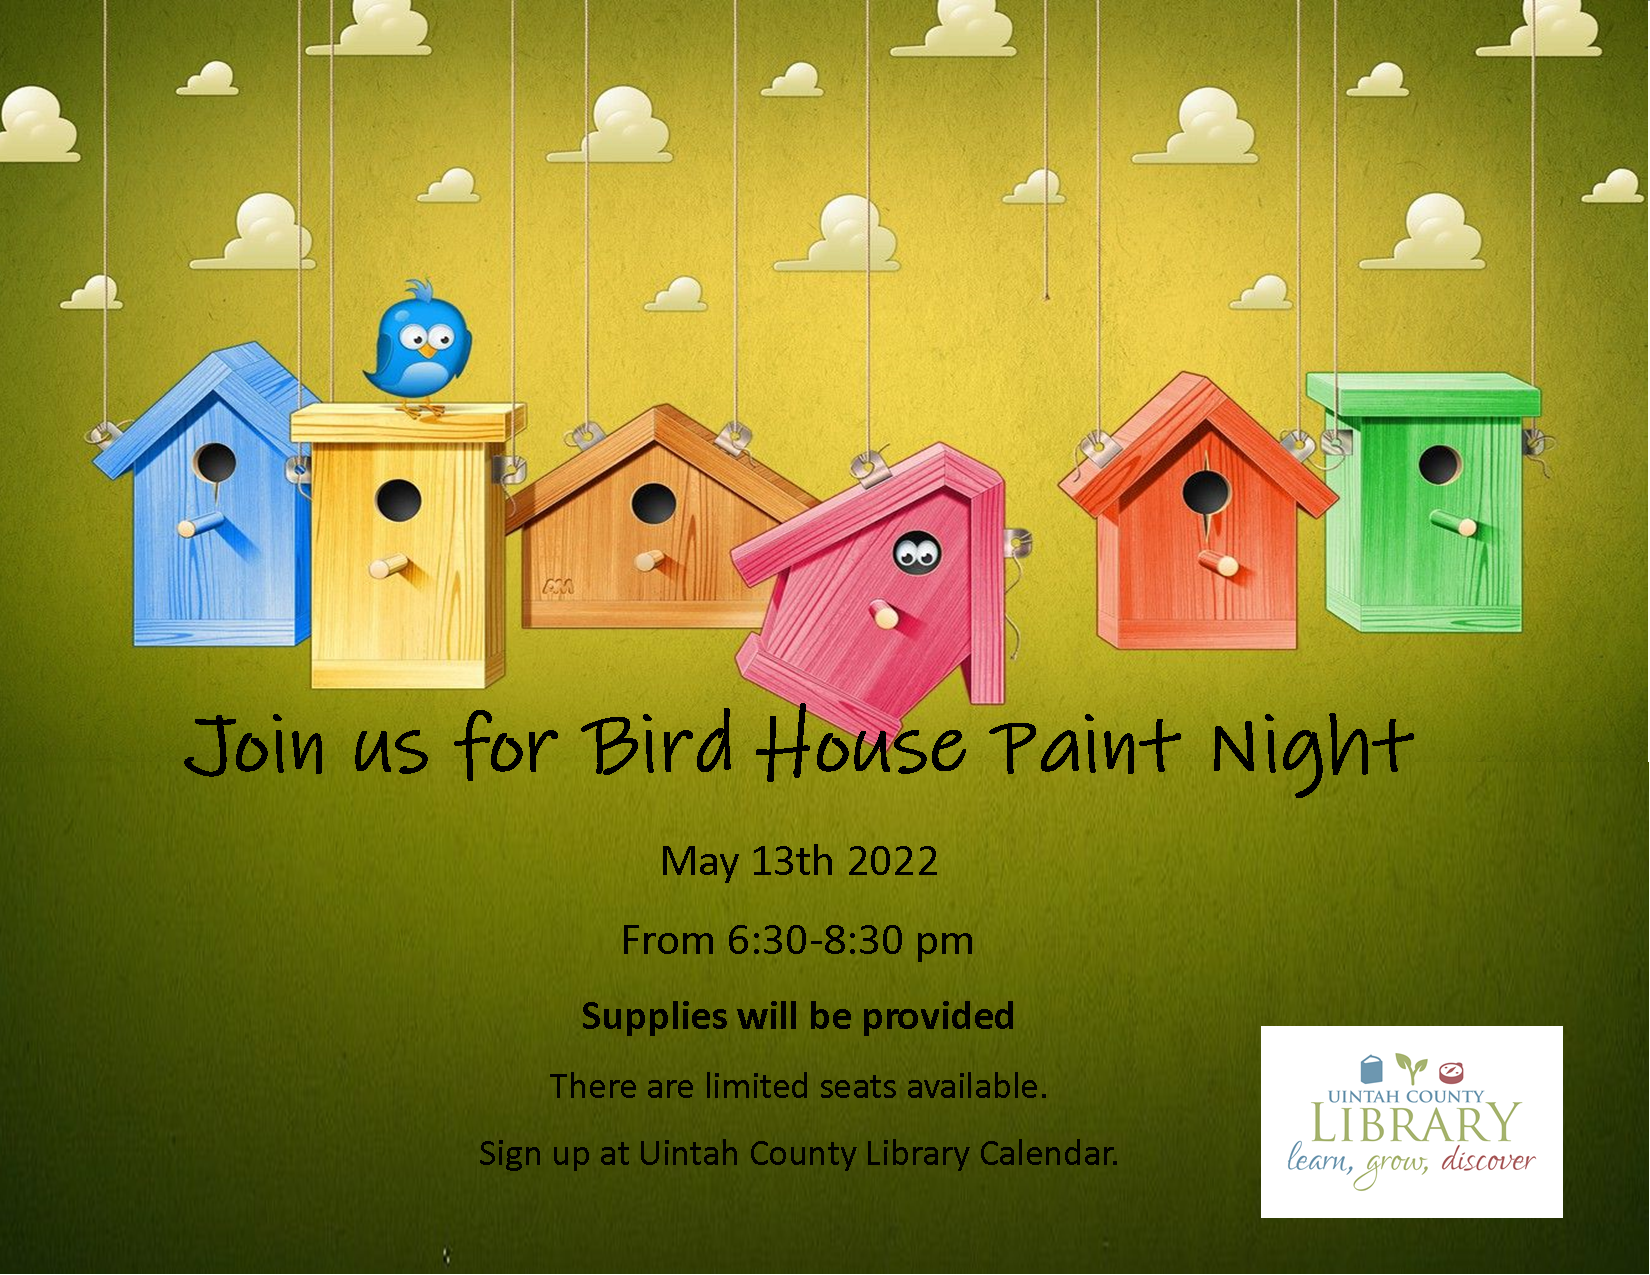 Join us for Bird House Paint Night! Supplies will be provided. Seating is limited.